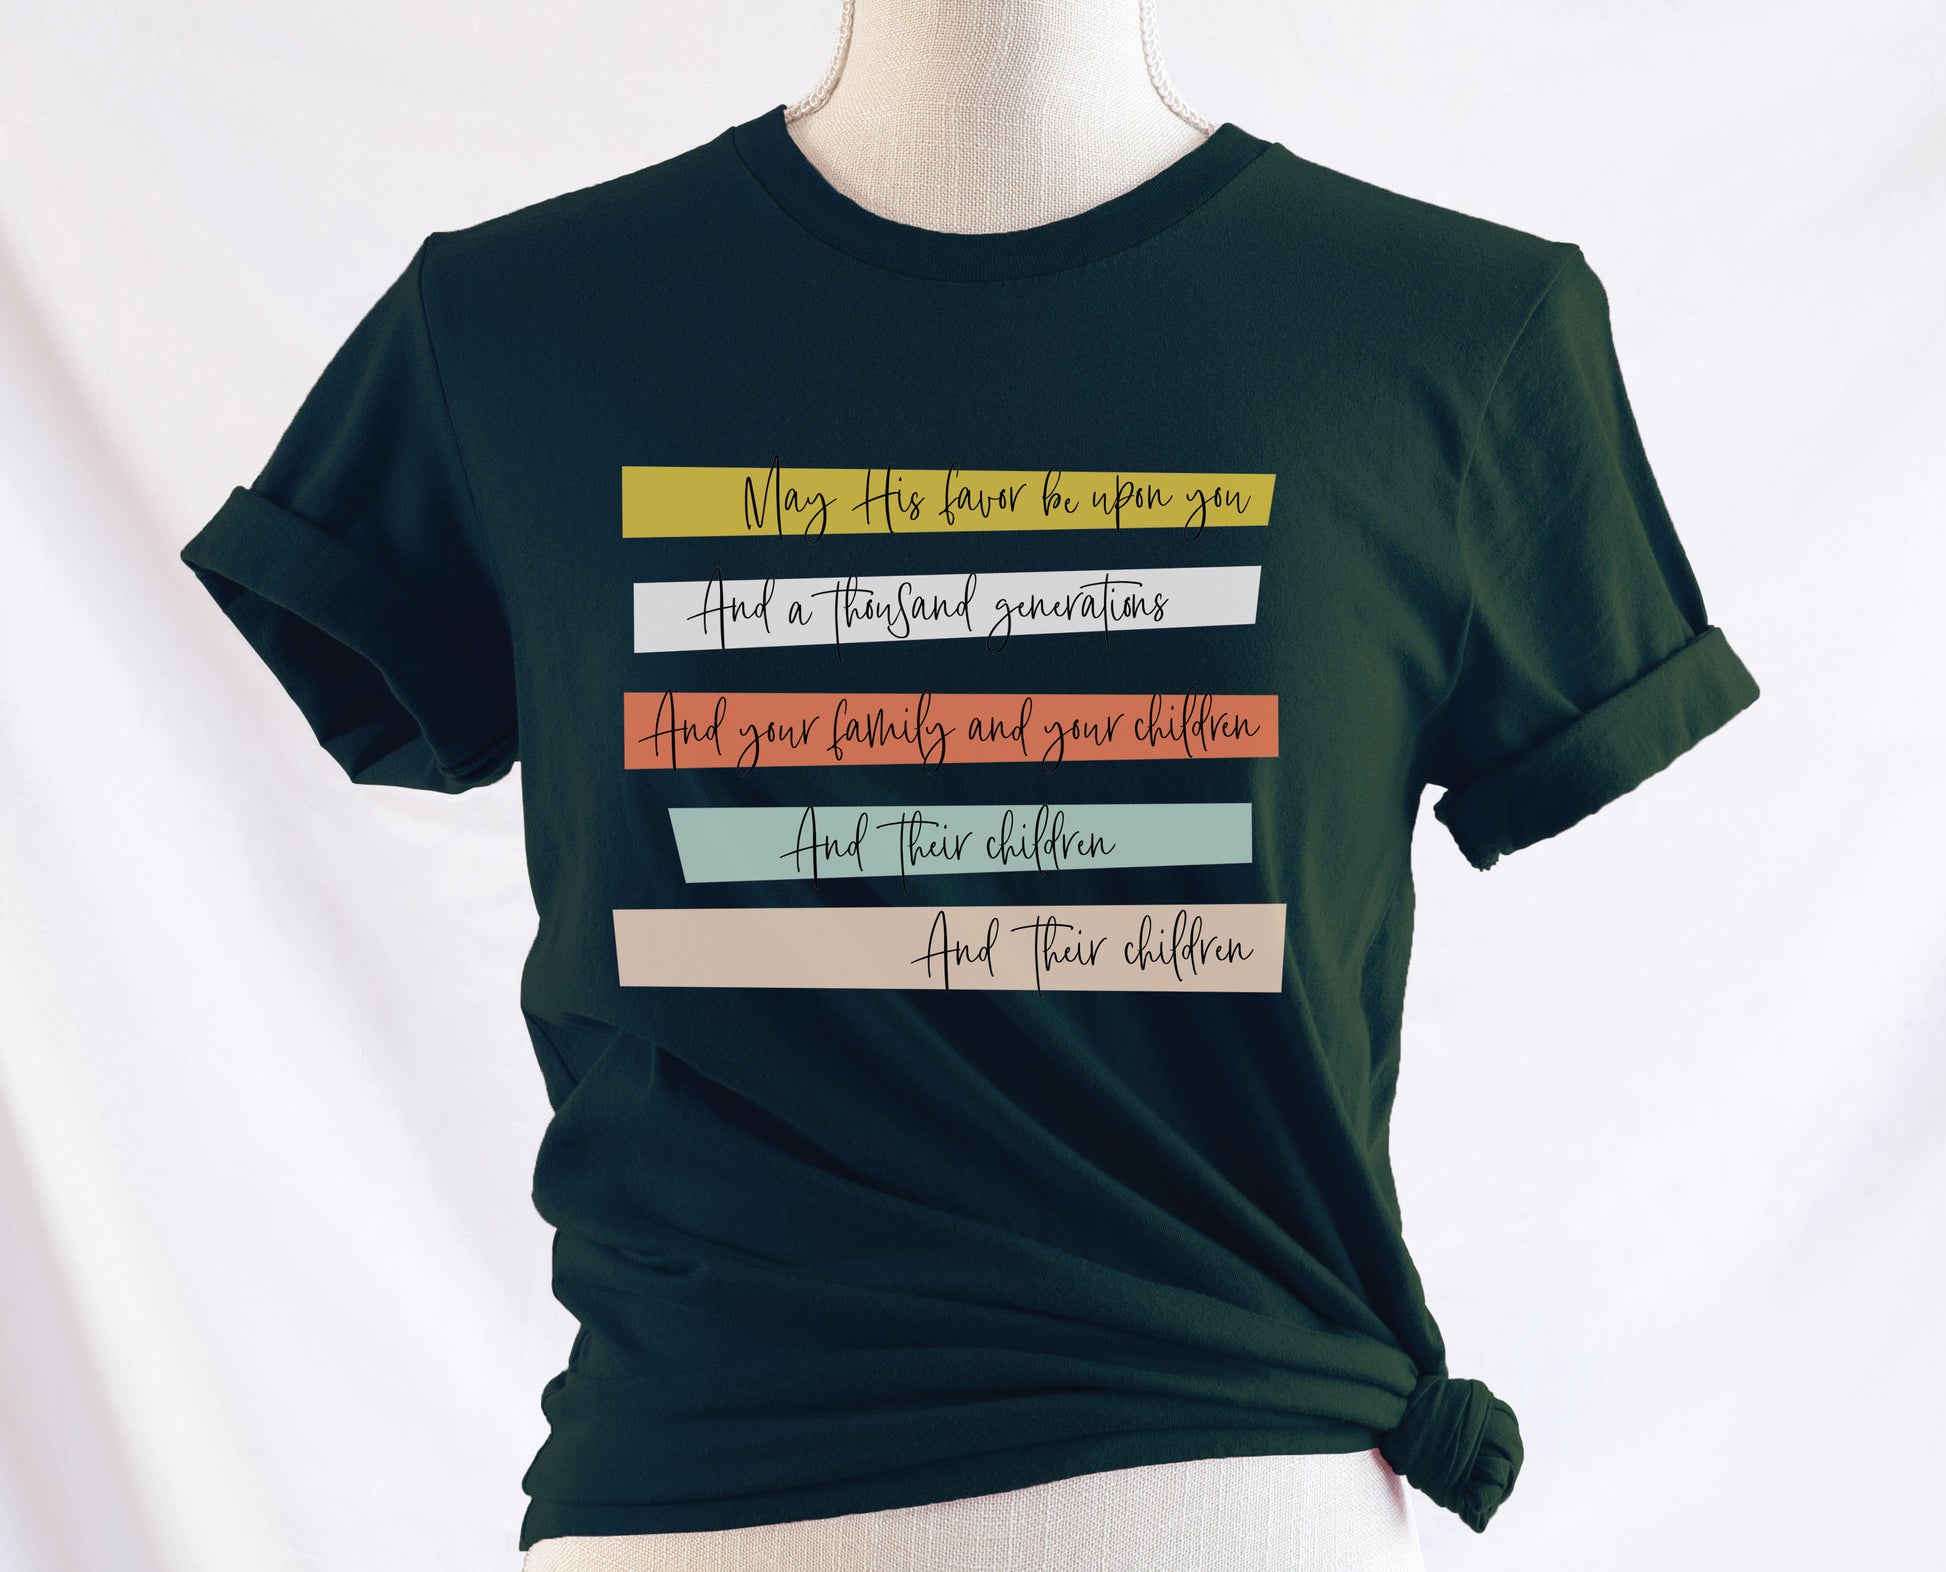 May His Favor Be Upon You and a thousand generations The Family and children Blessing Christian aesthetic 5 bars design printed on soft forest green t-shirt for women